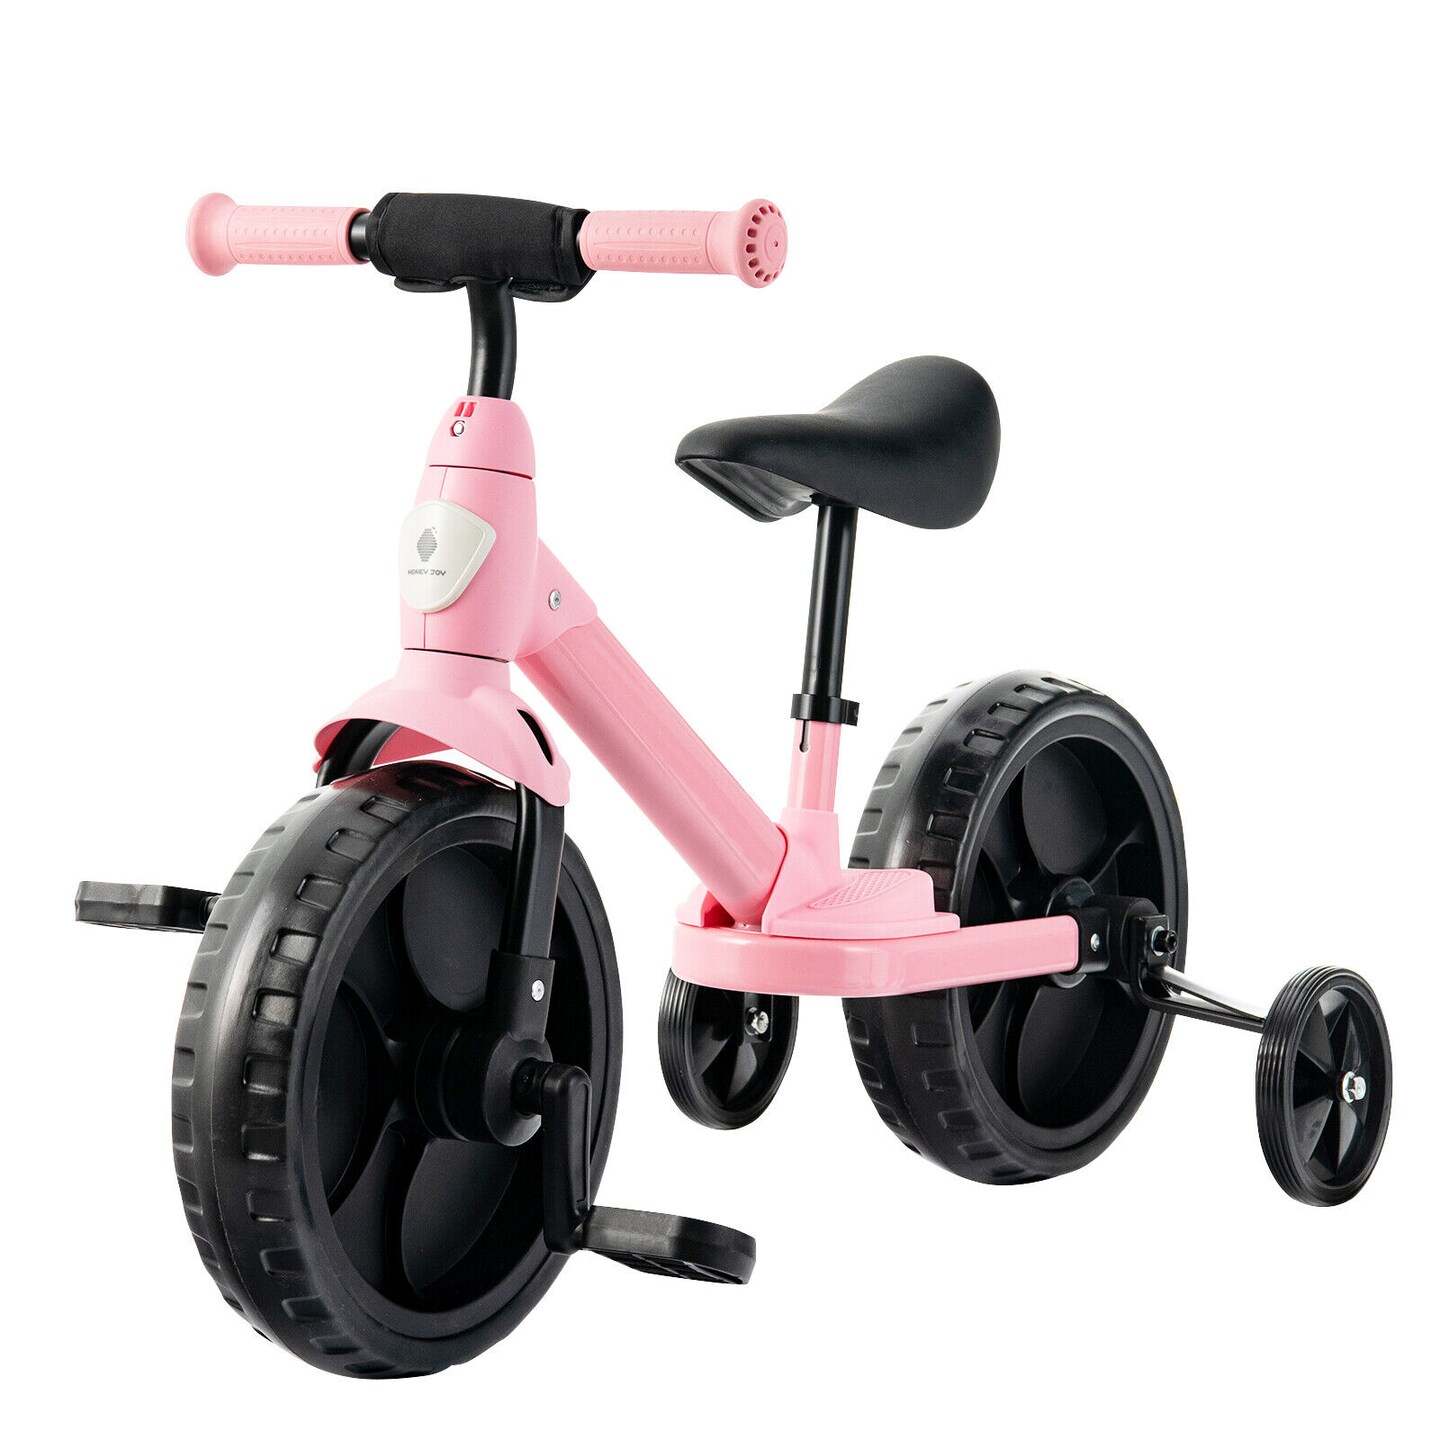 4-in-1 Kids Training Bike Toddler Tricycle with Training Wheels and Pedals